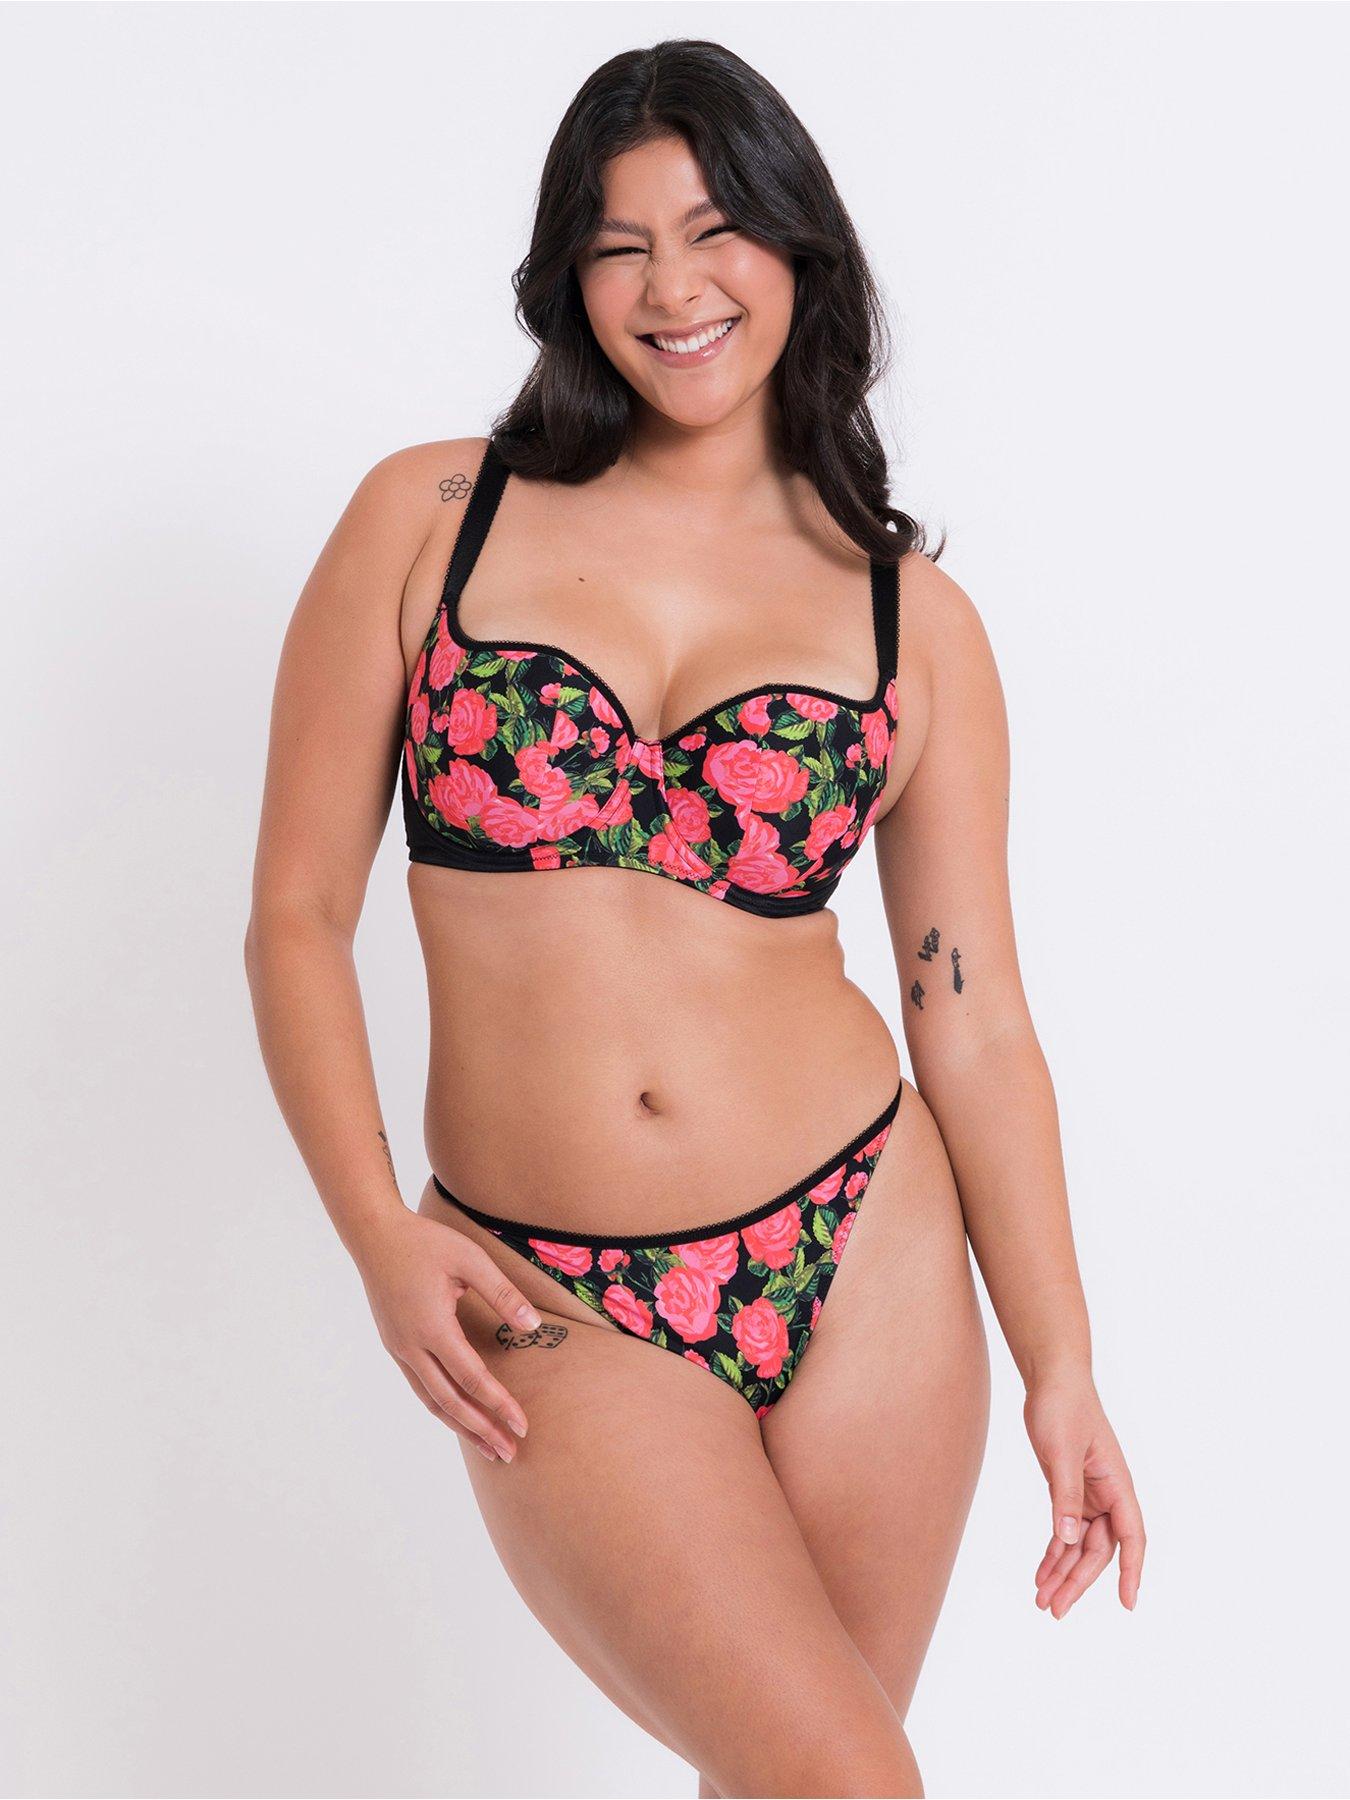 Curvy Kate's Best Bras for Large Busts This Christmas! – Curvy Kate US